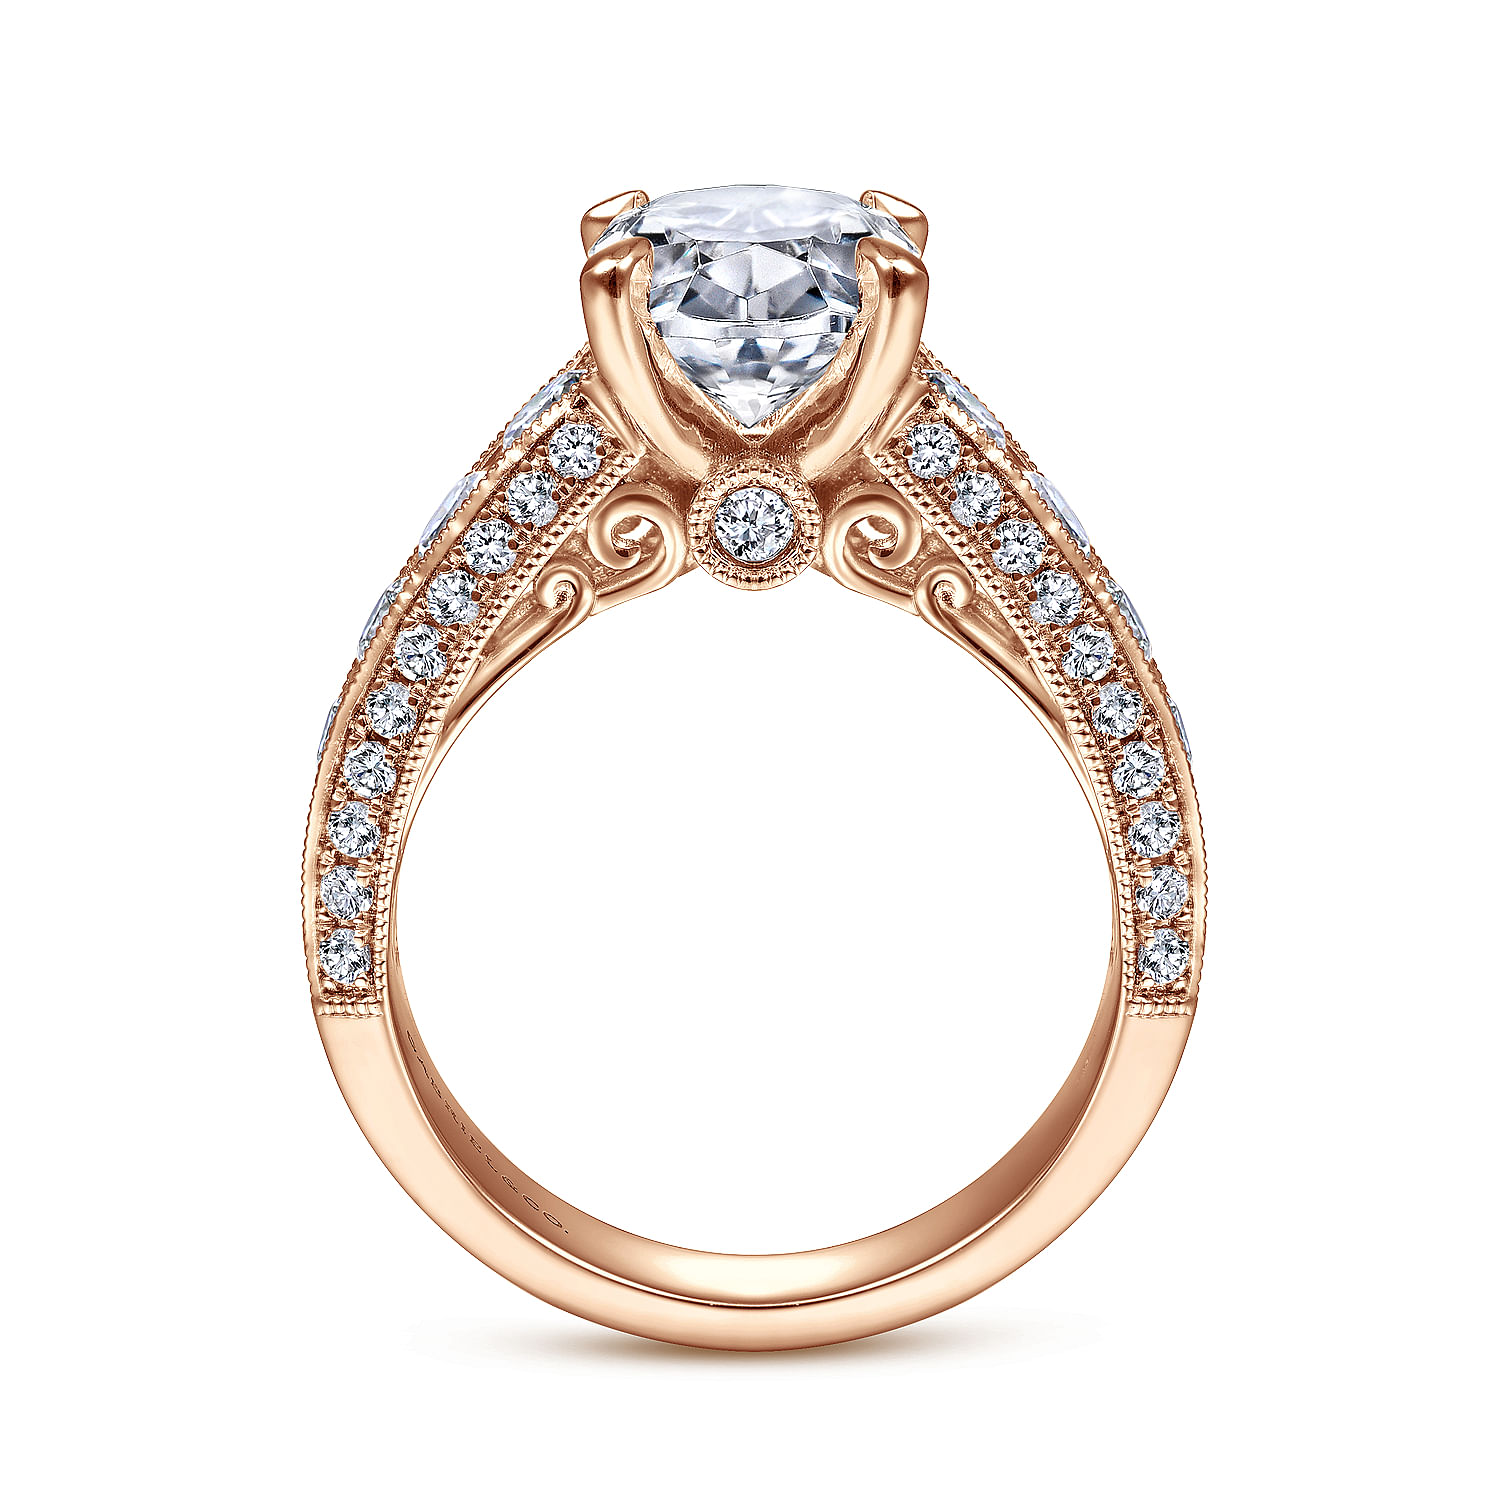 Vintage Inspired 14K Rose Gold Wide Band Oval Diamond Engagement Ring